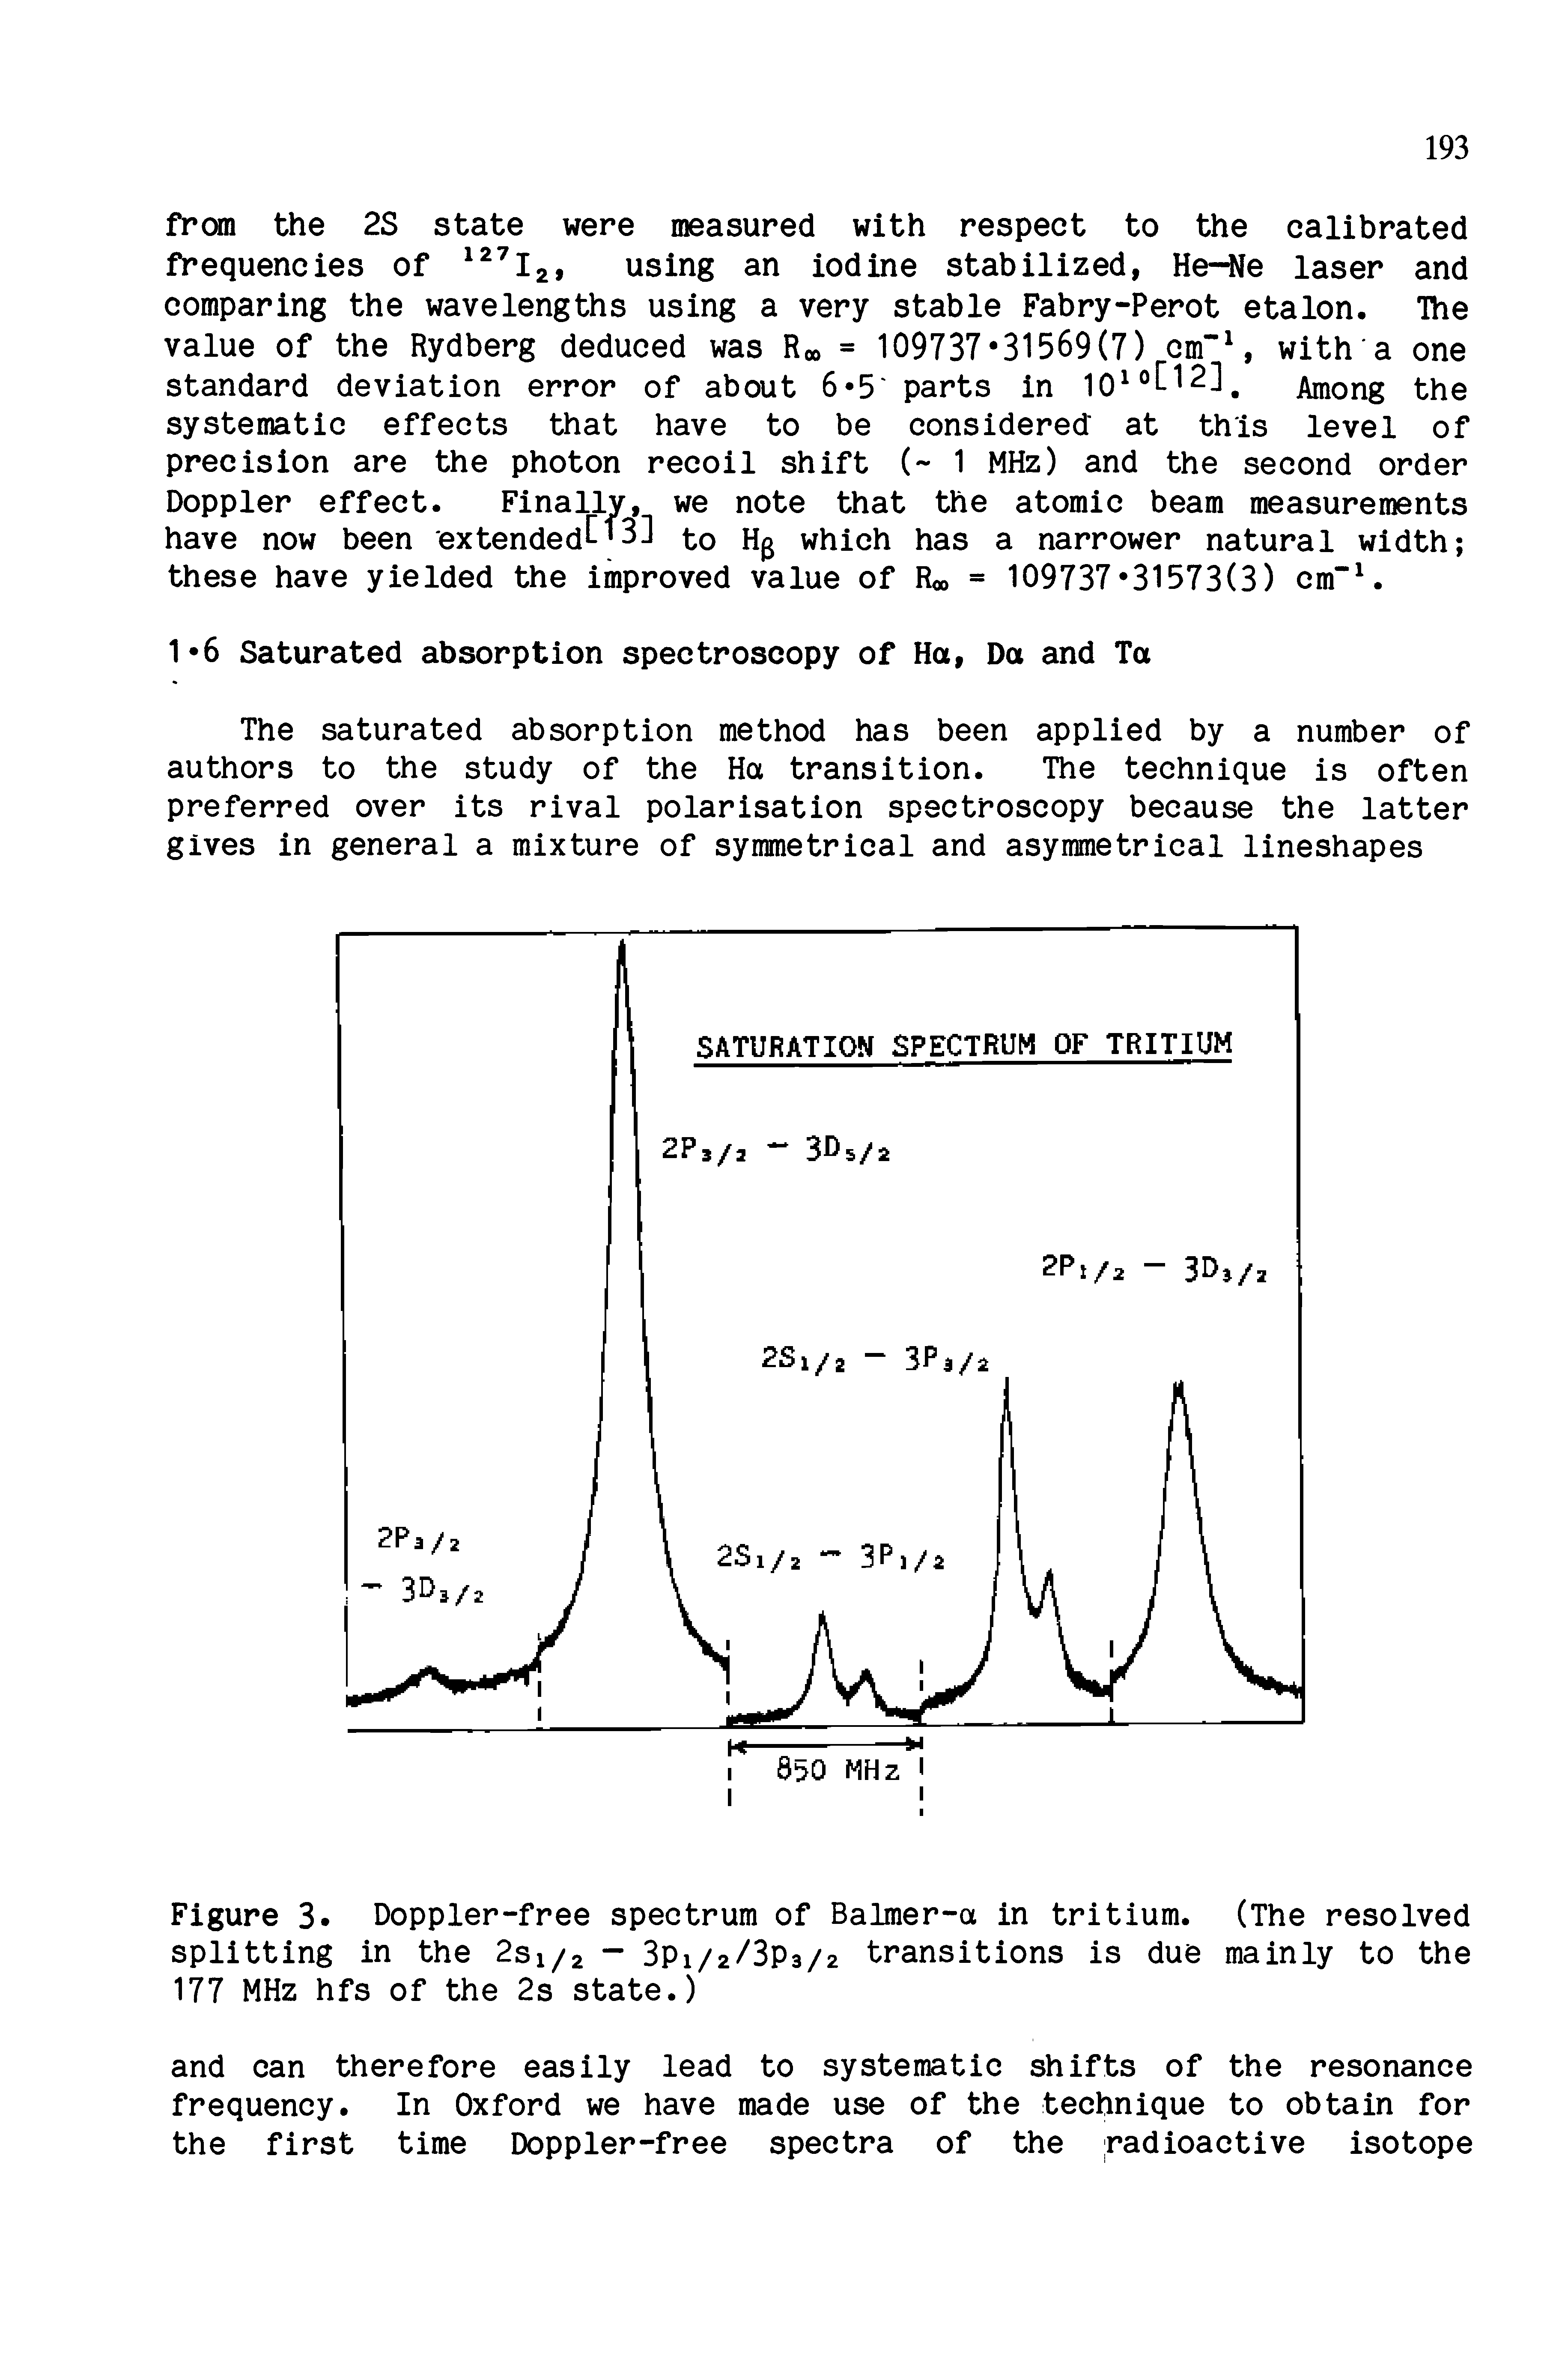 Figure 3. Doppler-free spectrum of Balmer-a in tritium. (The resolved splitting in the 2si/2 SPi/z/SPa/z transitions is due mainly to the 177 MHz hfs of the 2s state.)...